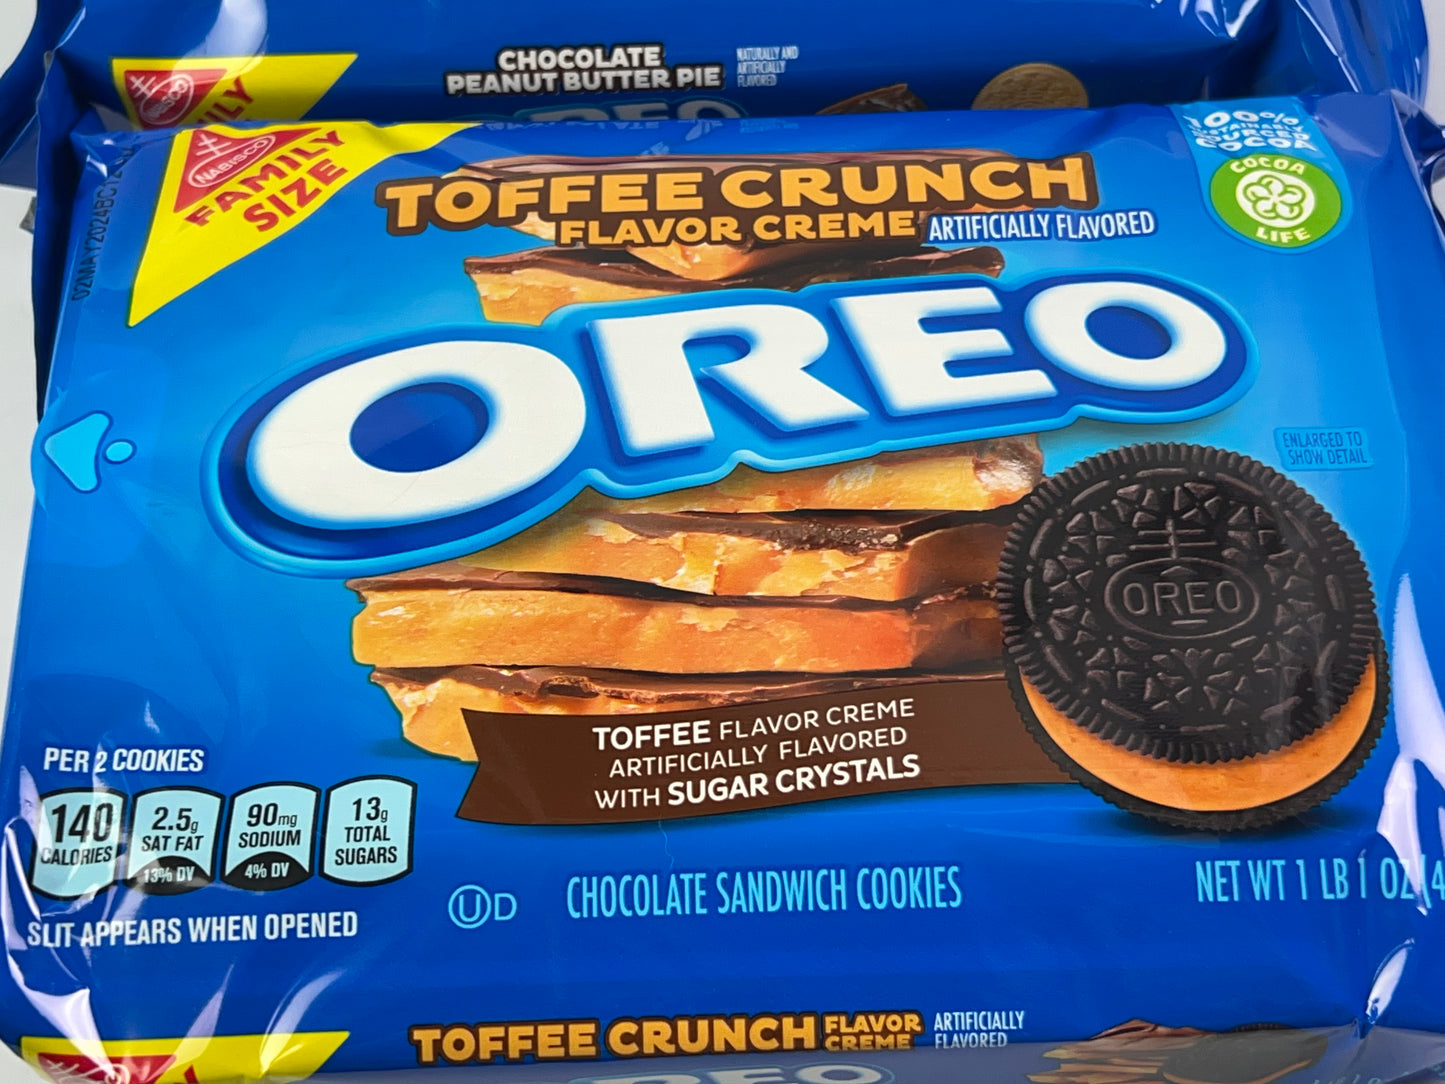 OREO Chocolate Peanut Butter Pie/ Toffee Crunch Sandwich Cookies, Family Size, 17 oz